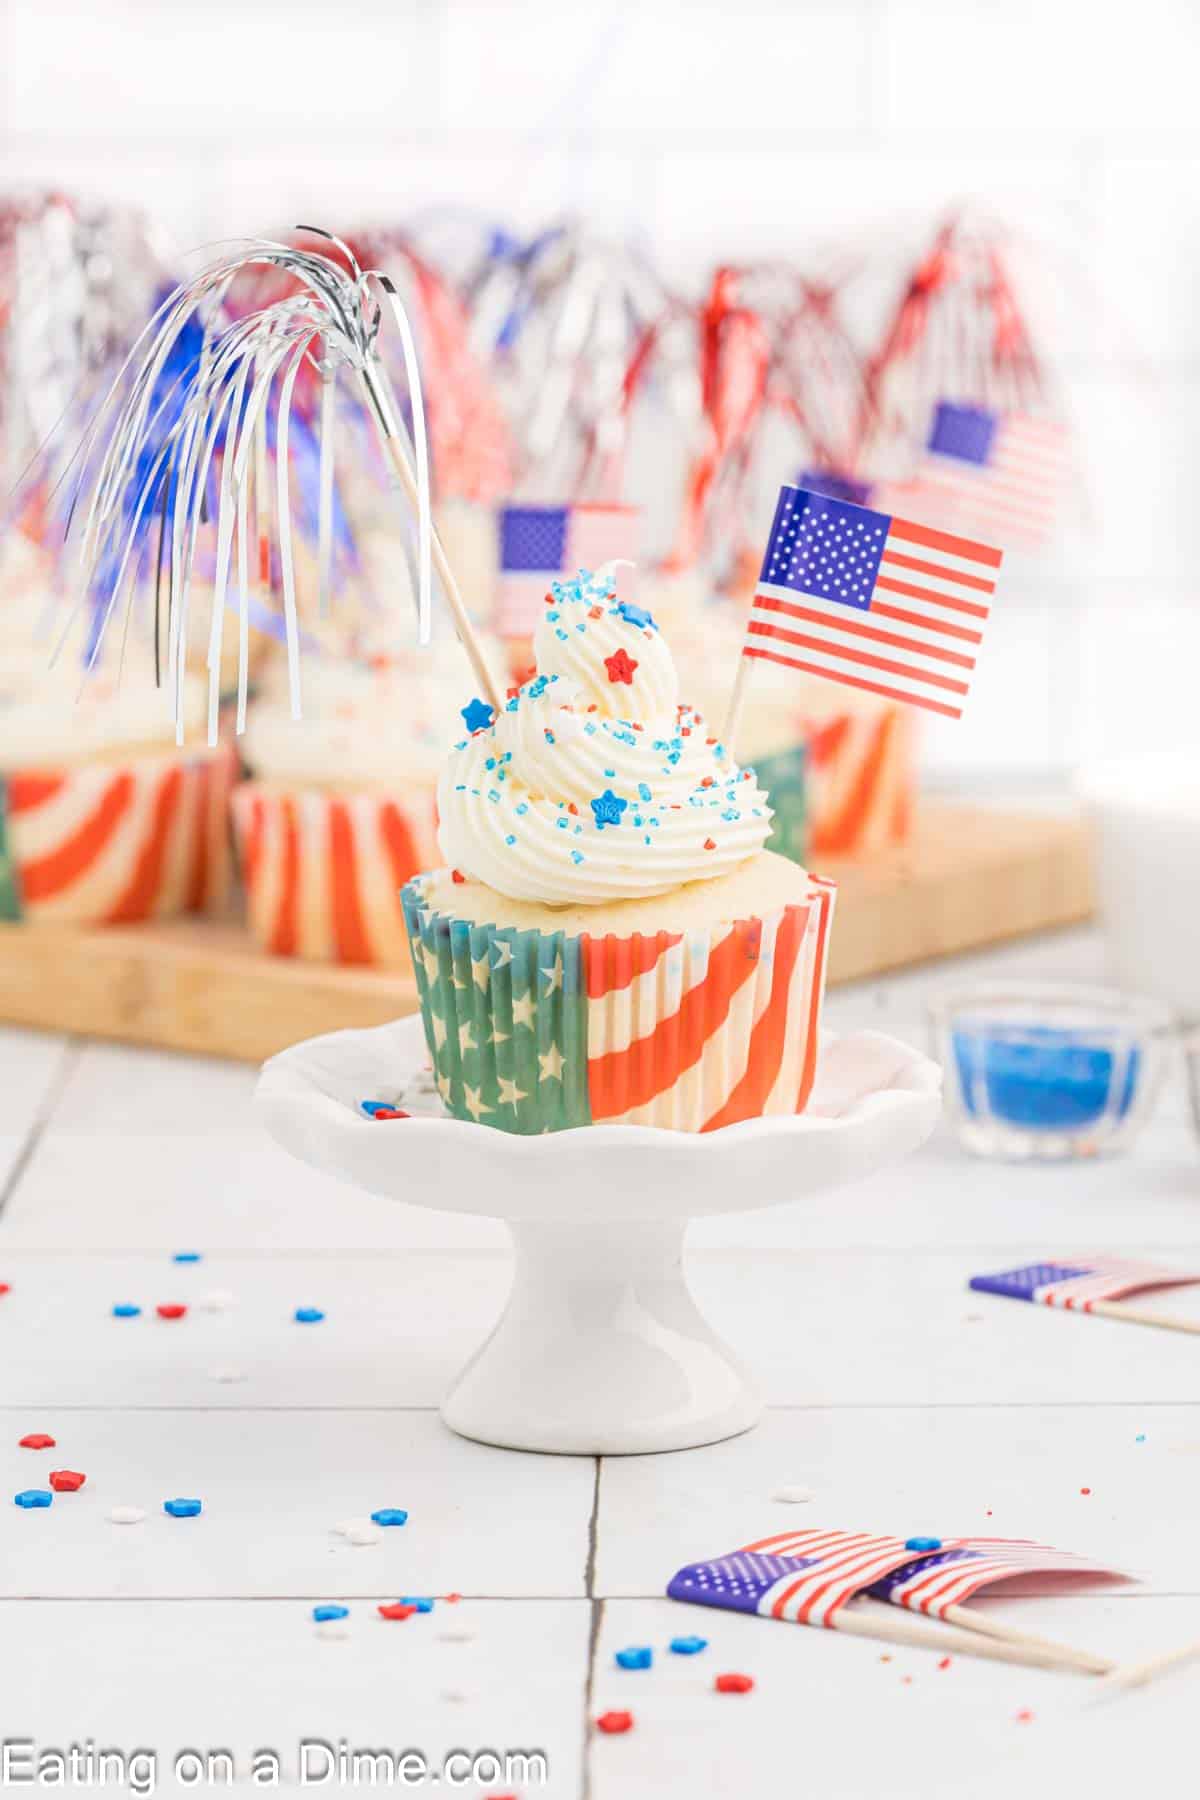 A festive Firecracker Cupcake with red, white, and blue swirl frosting, topped with star-shaped sprinkles, a small American flag, and silver tinsel sticks, displayed on a white stand. More similar cupcakes and patriotic decorations are visible in the background.